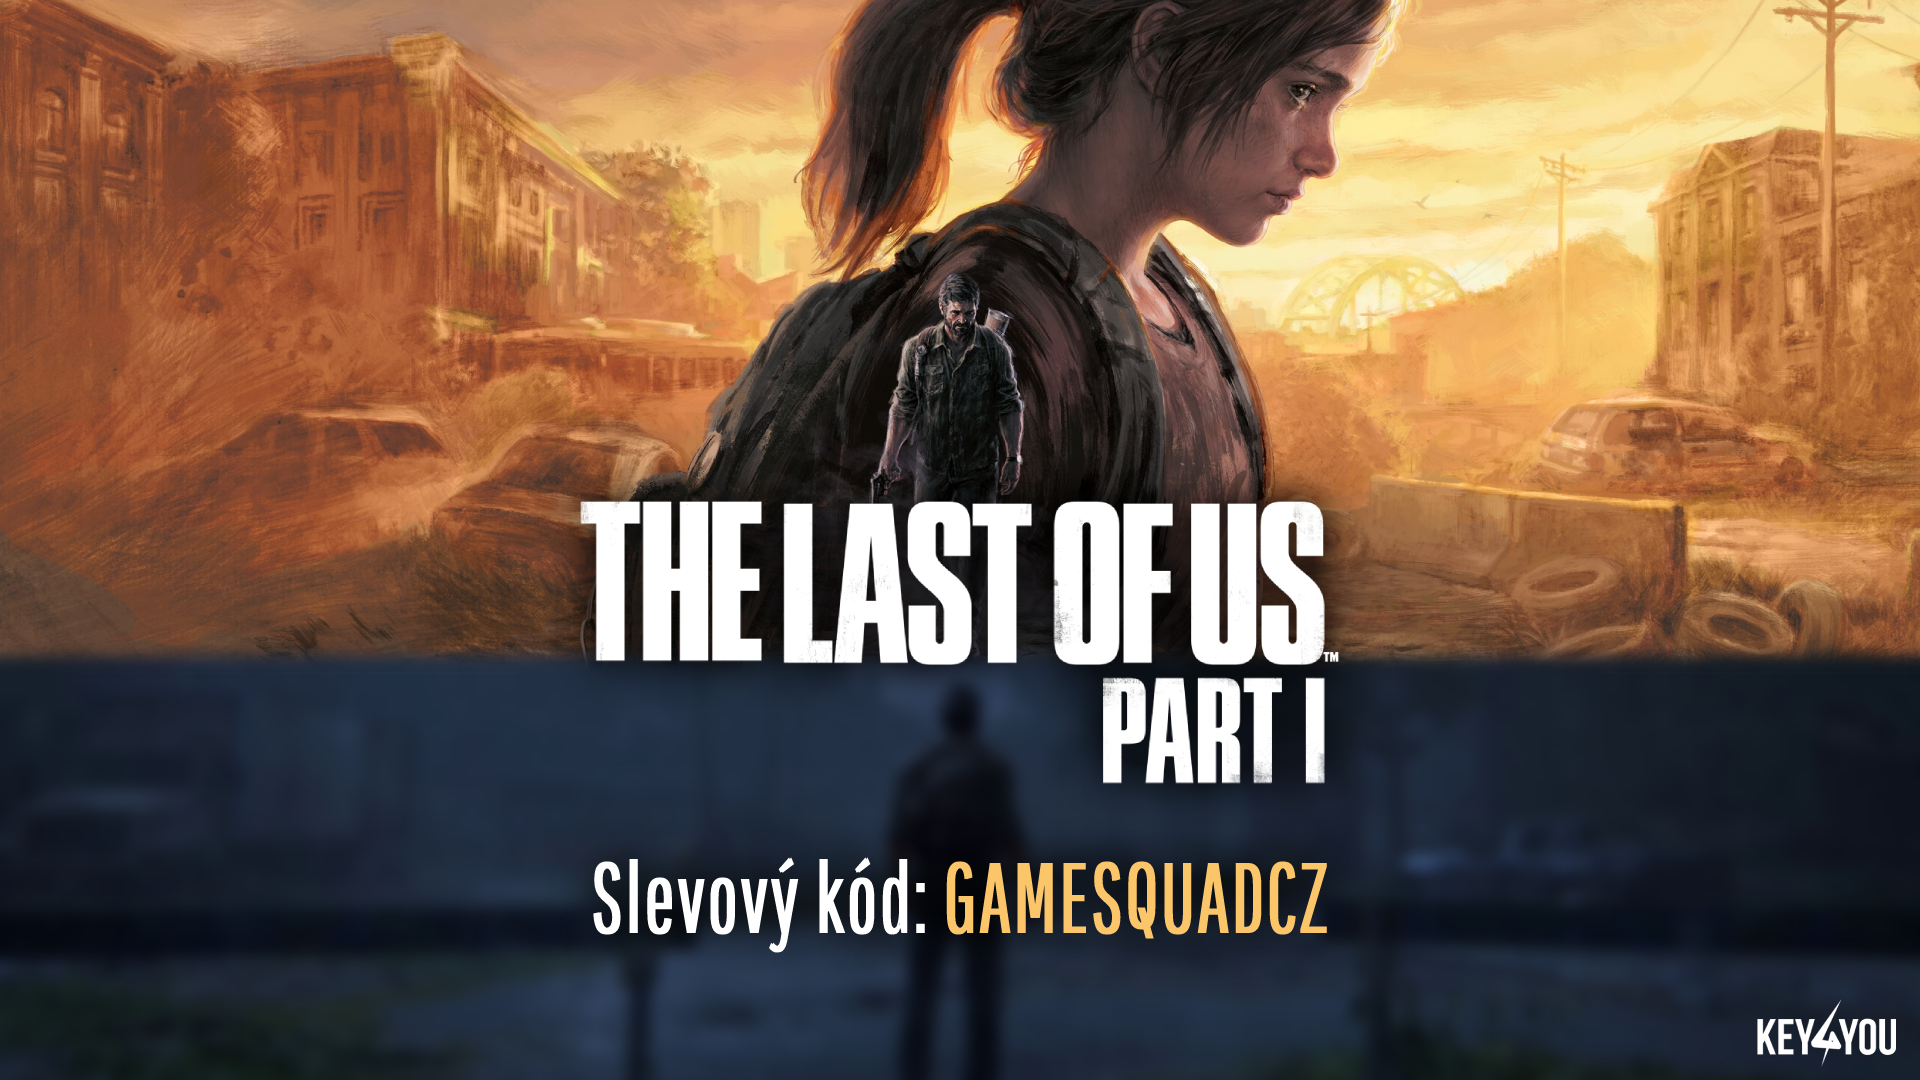 the last of us part 1 steam, pc, ps5